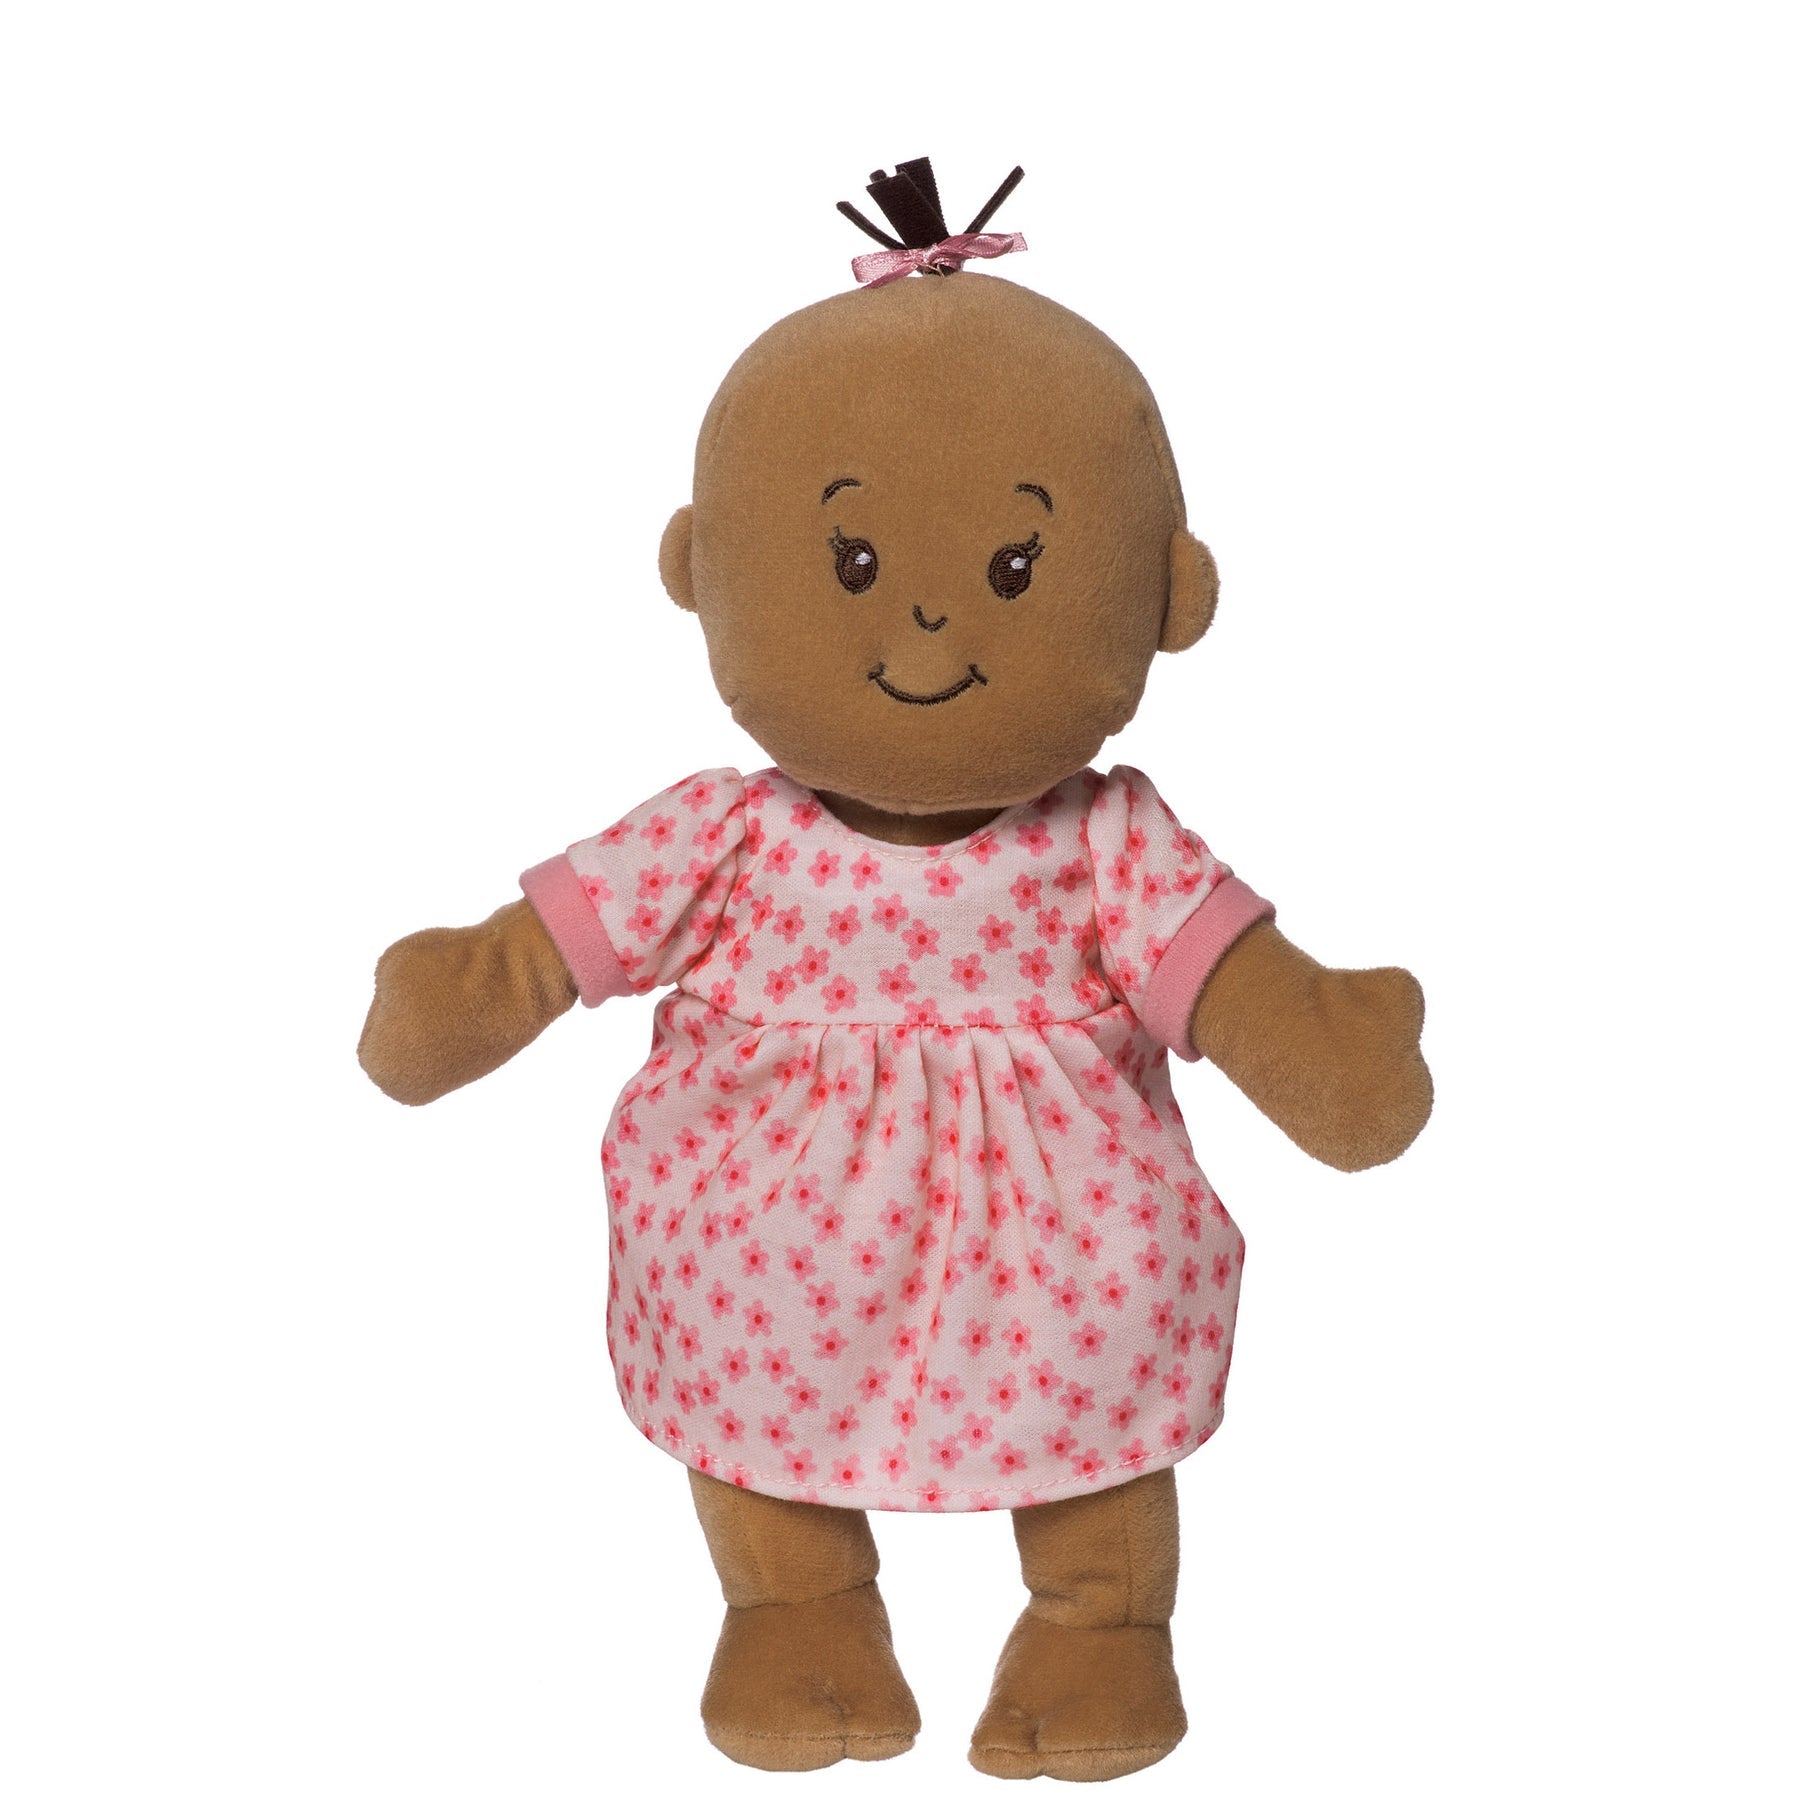 Baby Stella Doll with Brown Hair